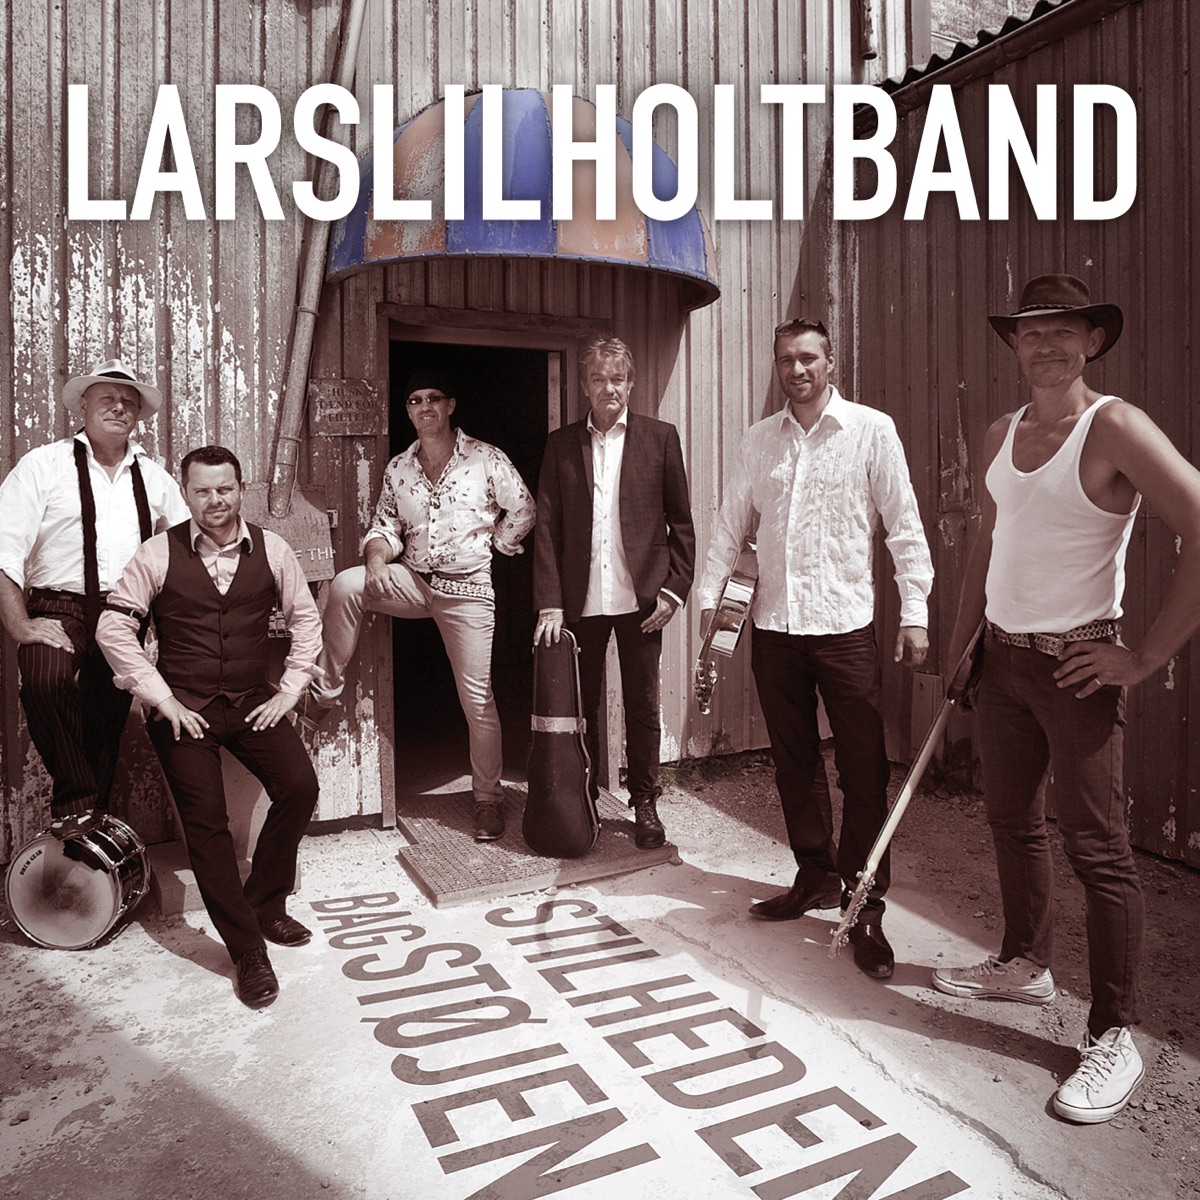 De Lyse Nætters Orkester by Lars Lilholt Band on Apple Music